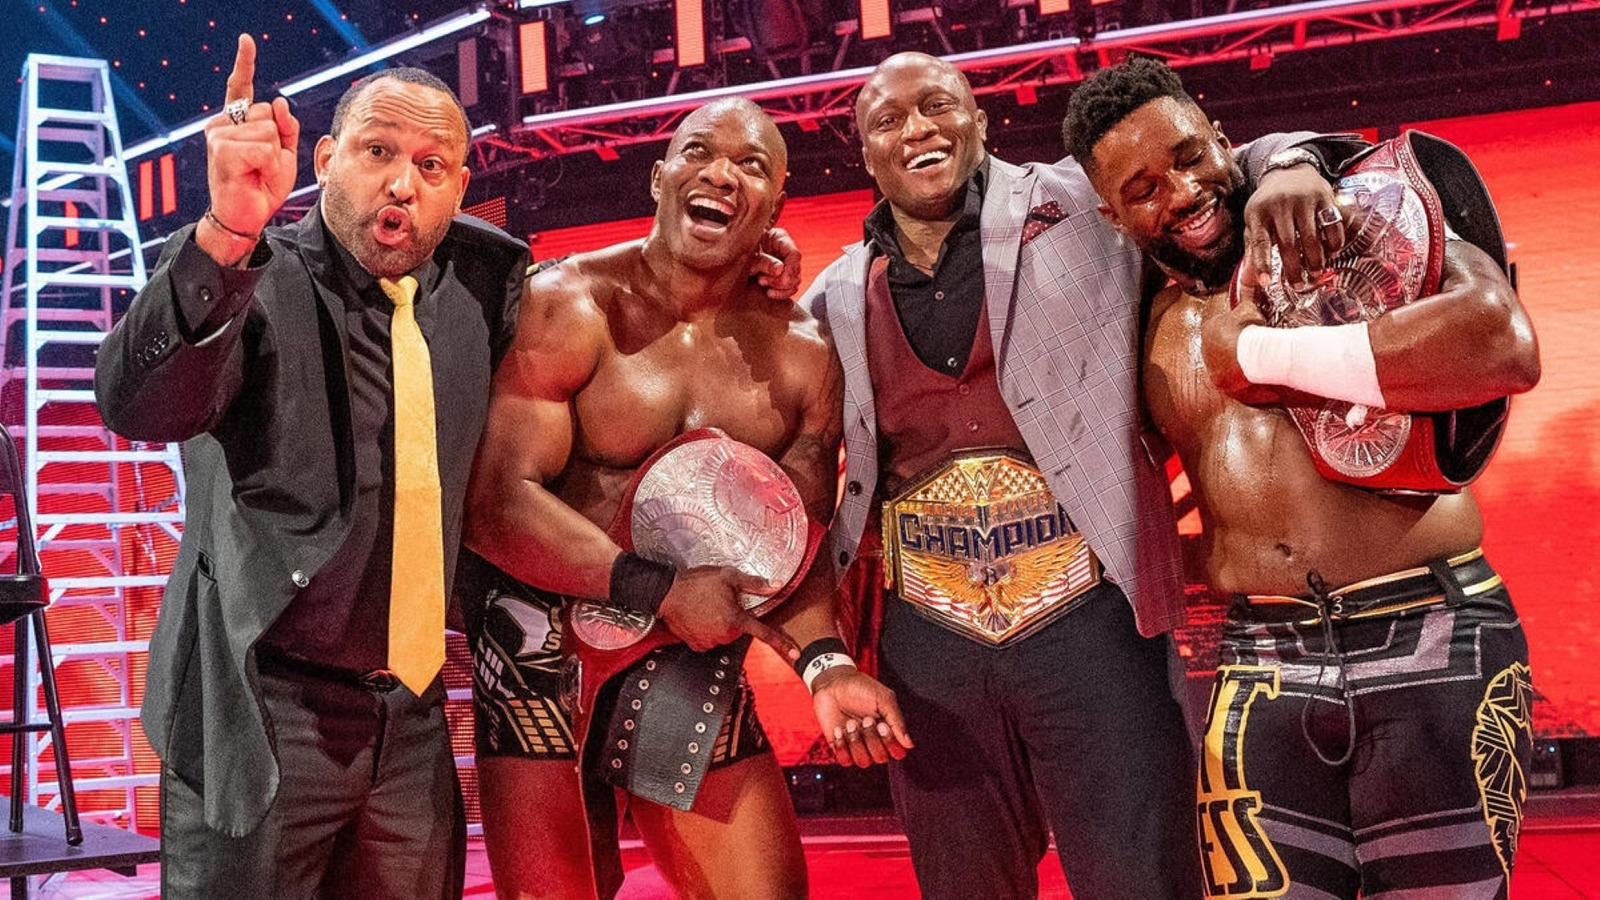 WWE Star MVP Claims Triple H Has No Plans to Reunite The Hurt Business, Suggests Racial Bias